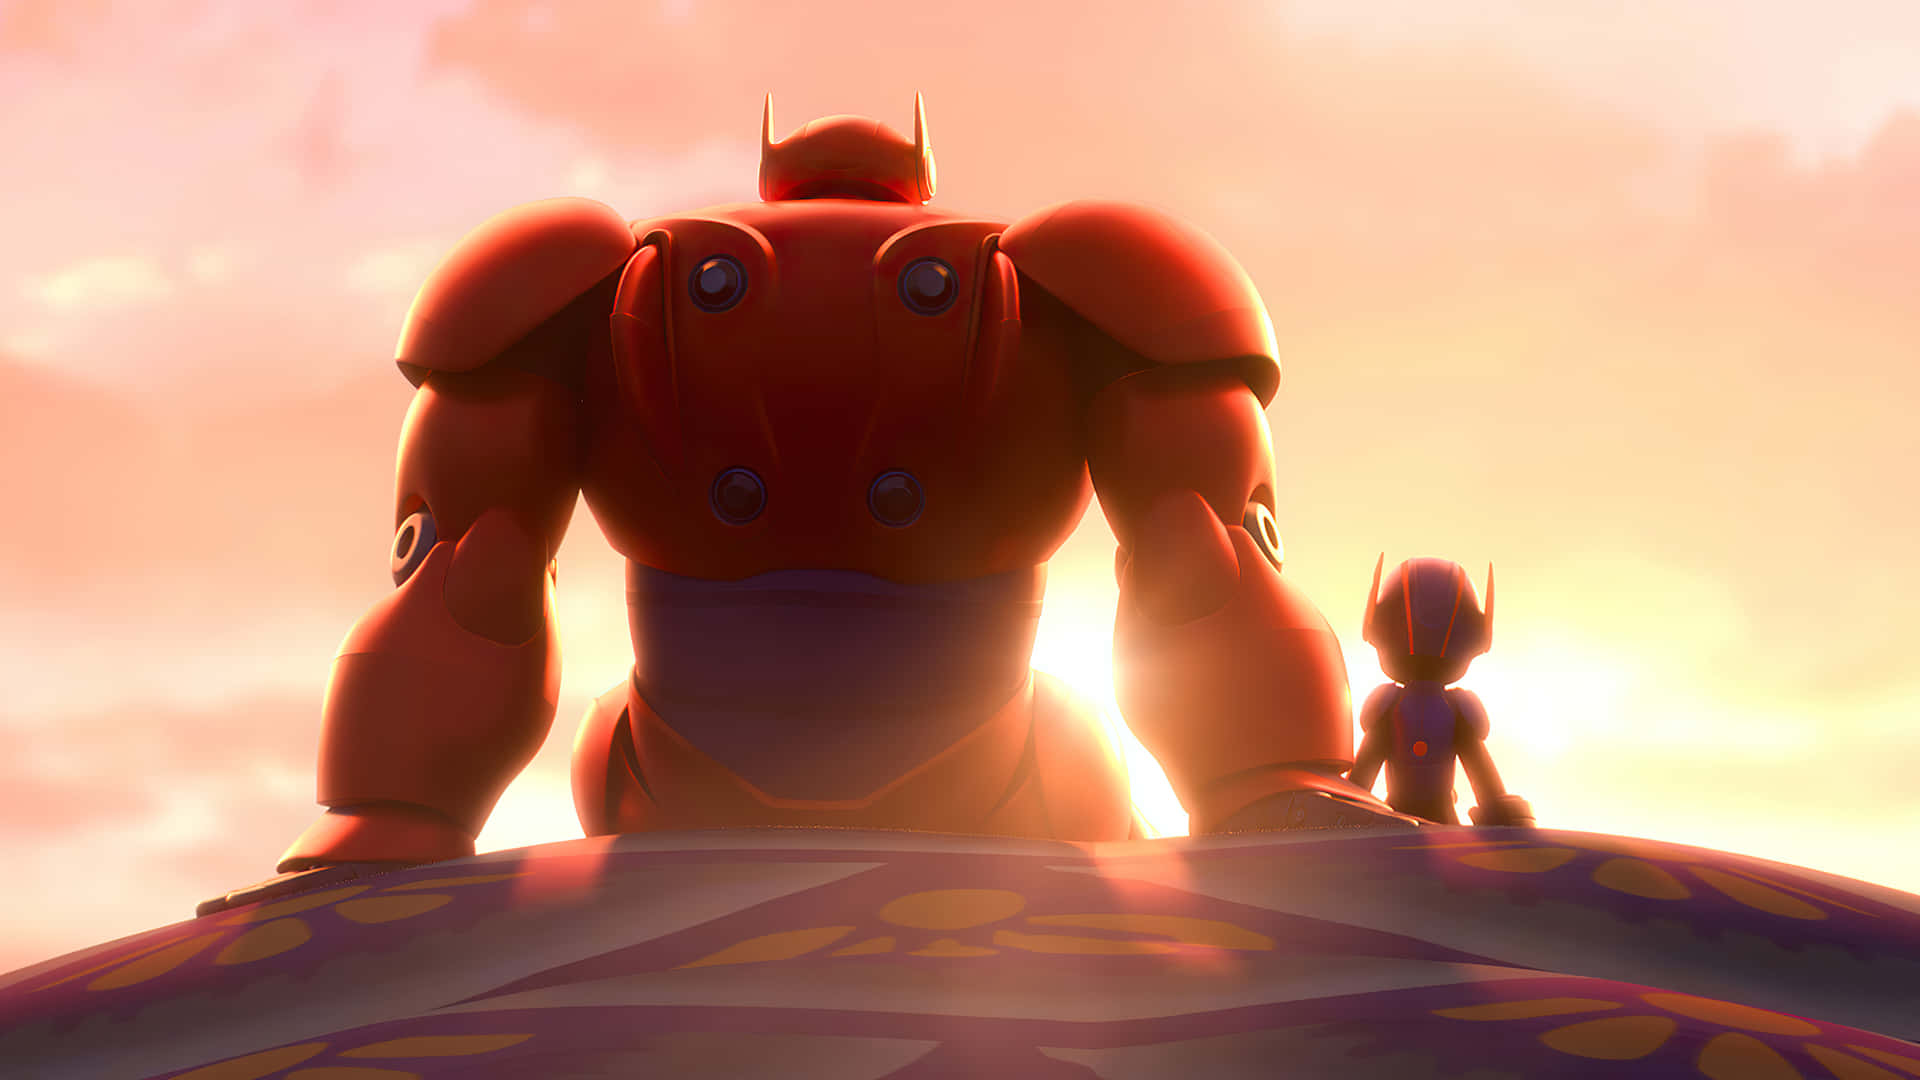 Discover the world of Big Hero 6